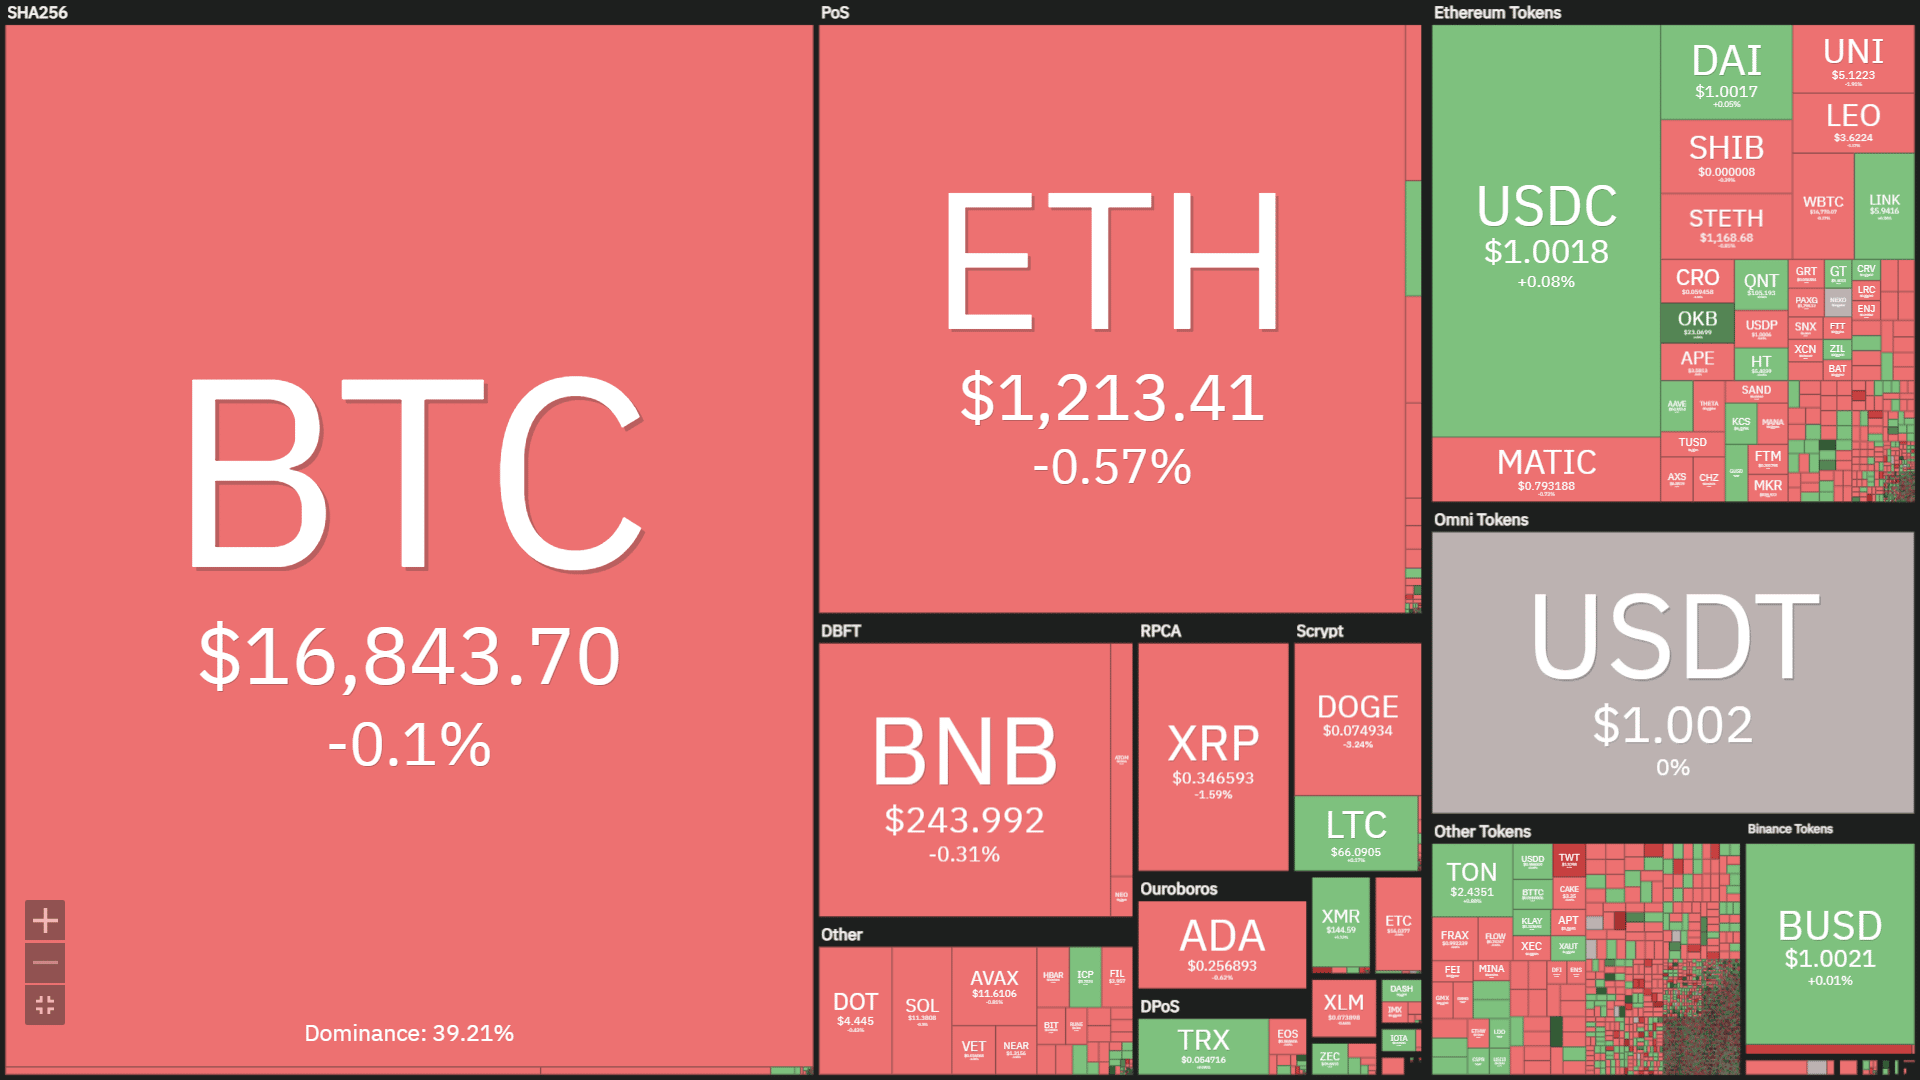 Heatmap of cryptocurrency prices